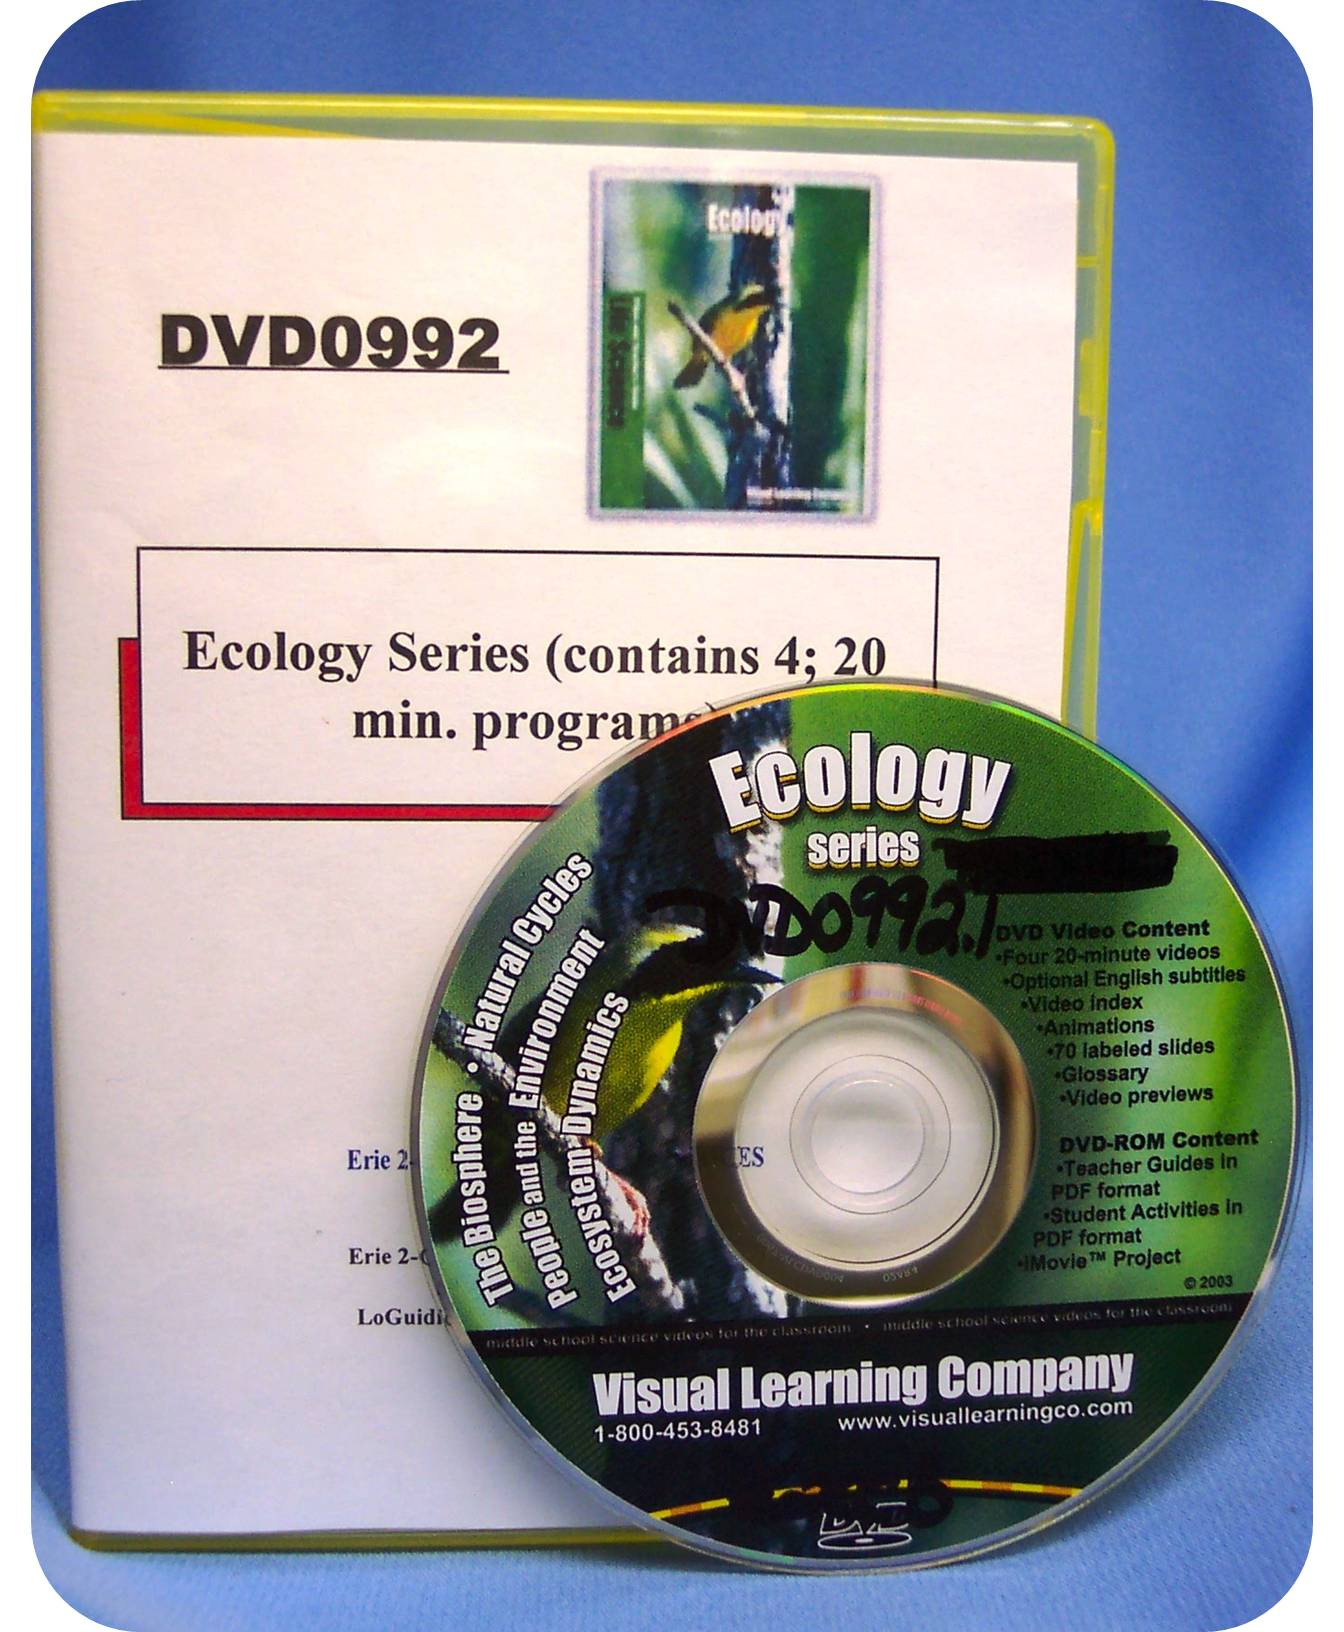 Ecology Series (contains 4; 20 min. programs)